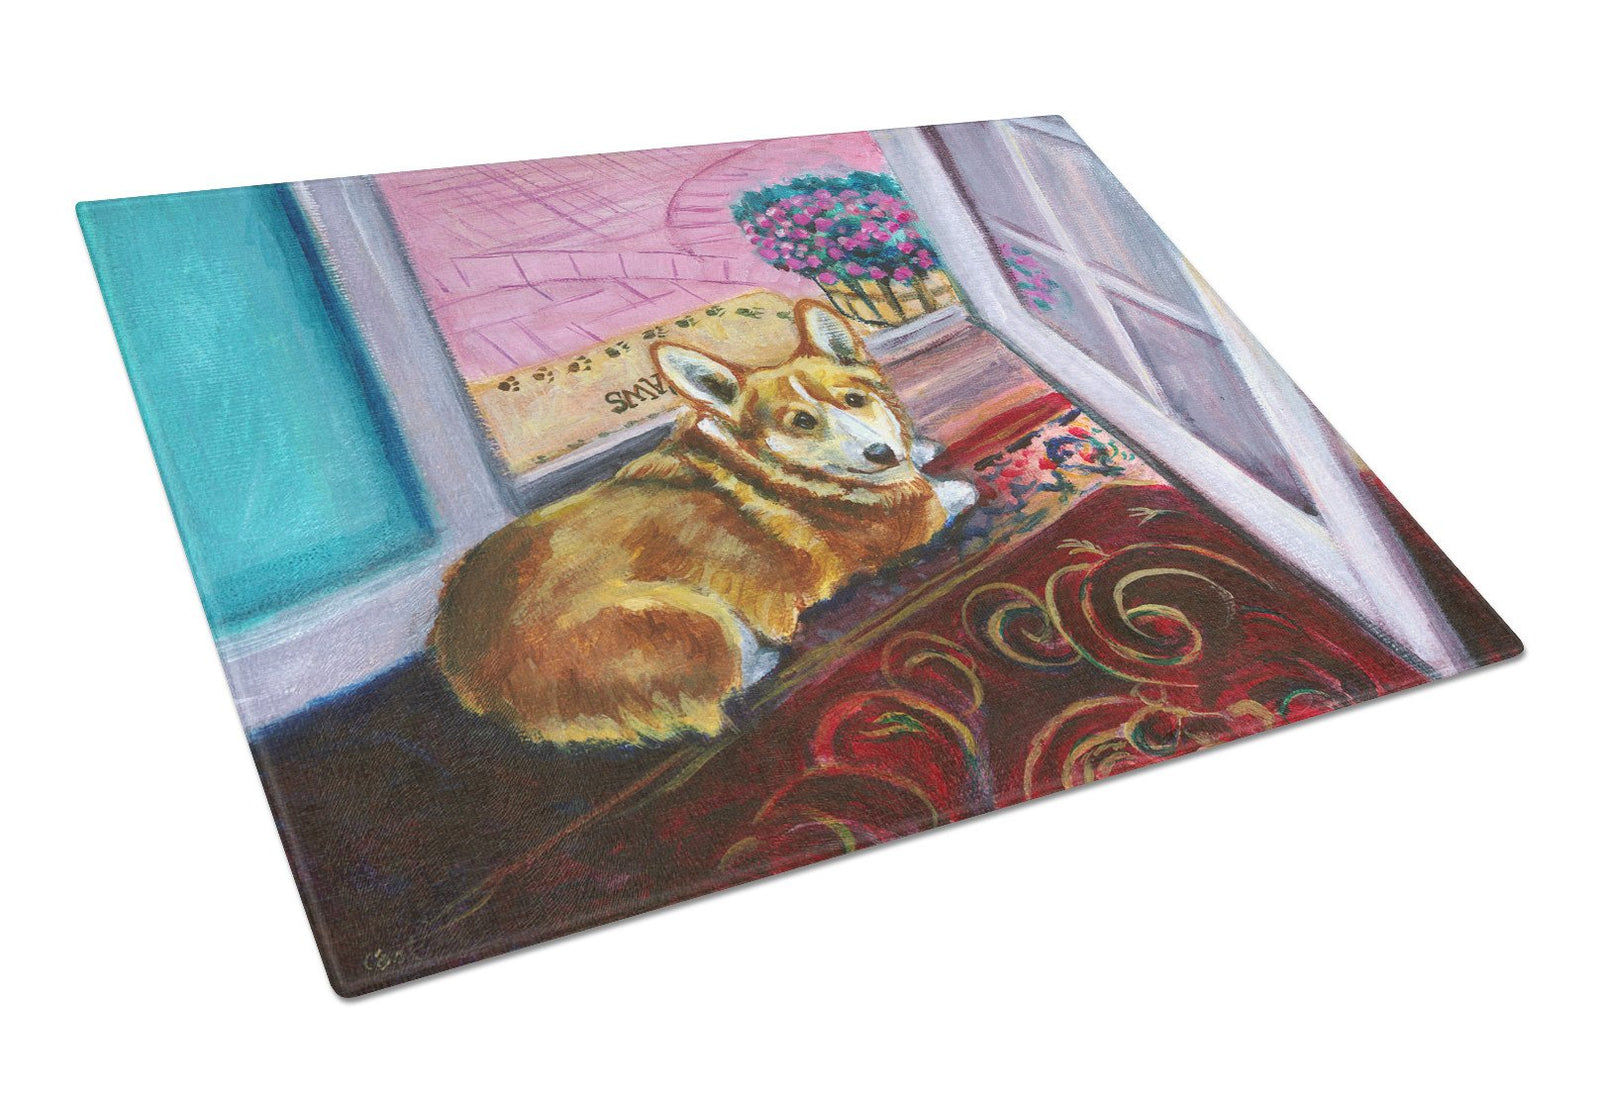 Corgi Watching from the Door Glass Cutting Board Large 7410LCB by Caroline's Treasures